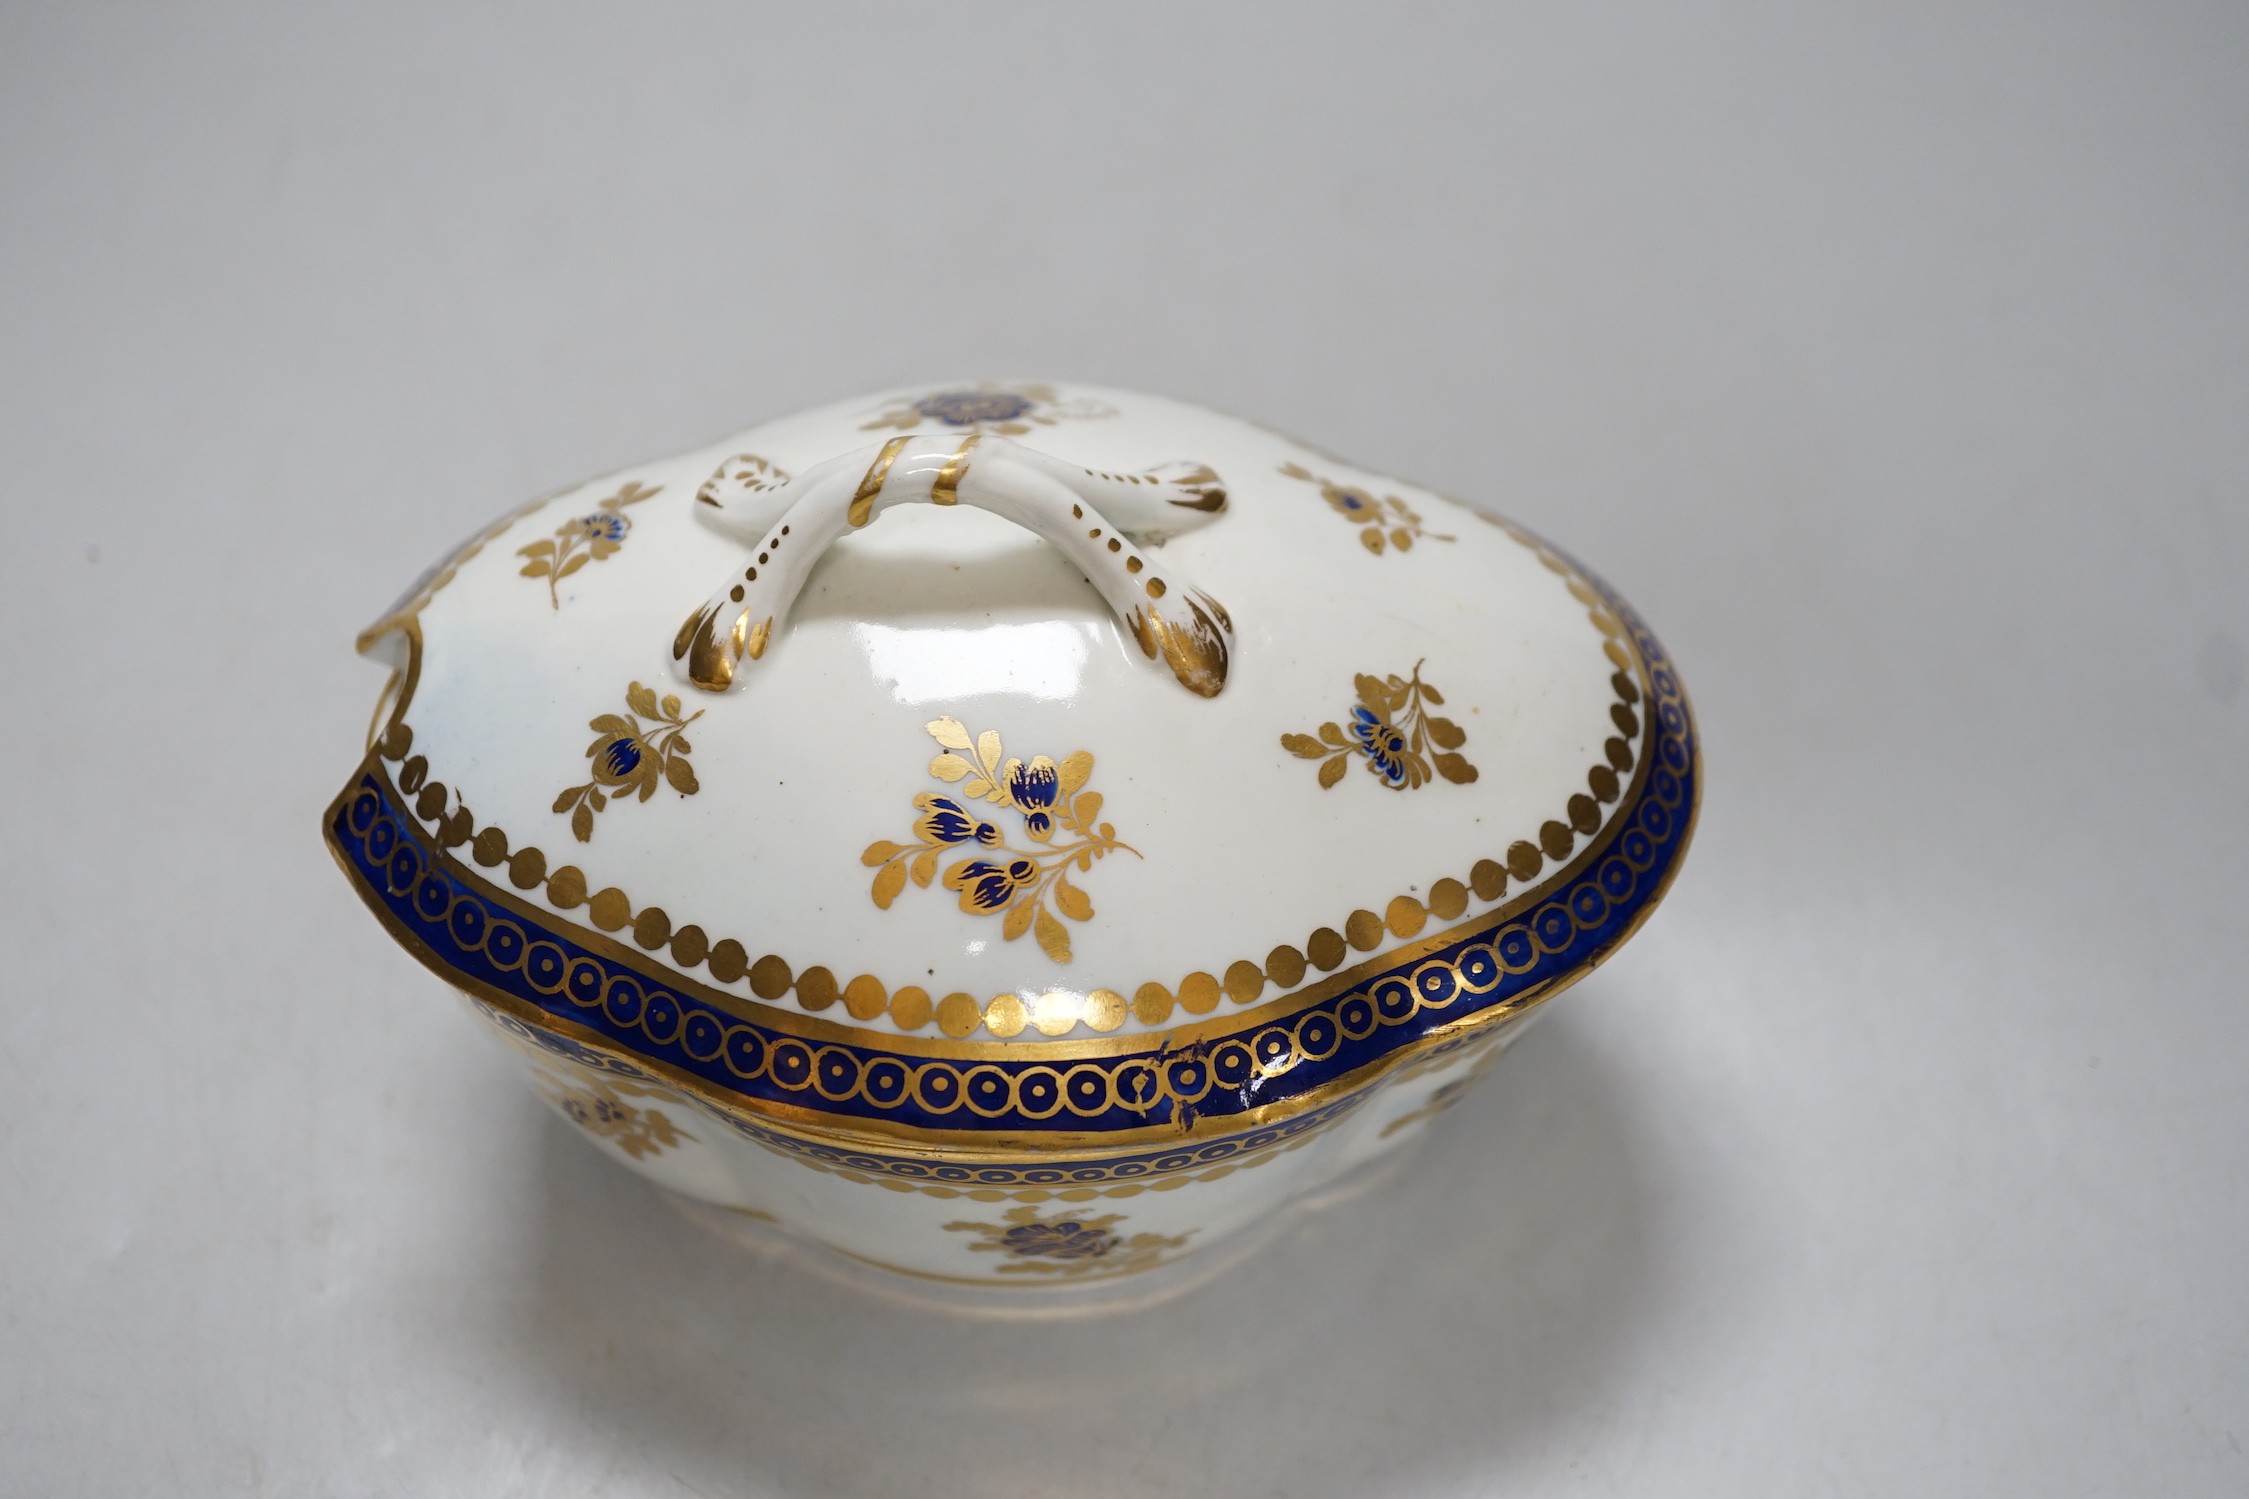 An 18th century Caughley tureen cover and stand with blue and gilt decoration, stand mis-fired to - Image 2 of 2